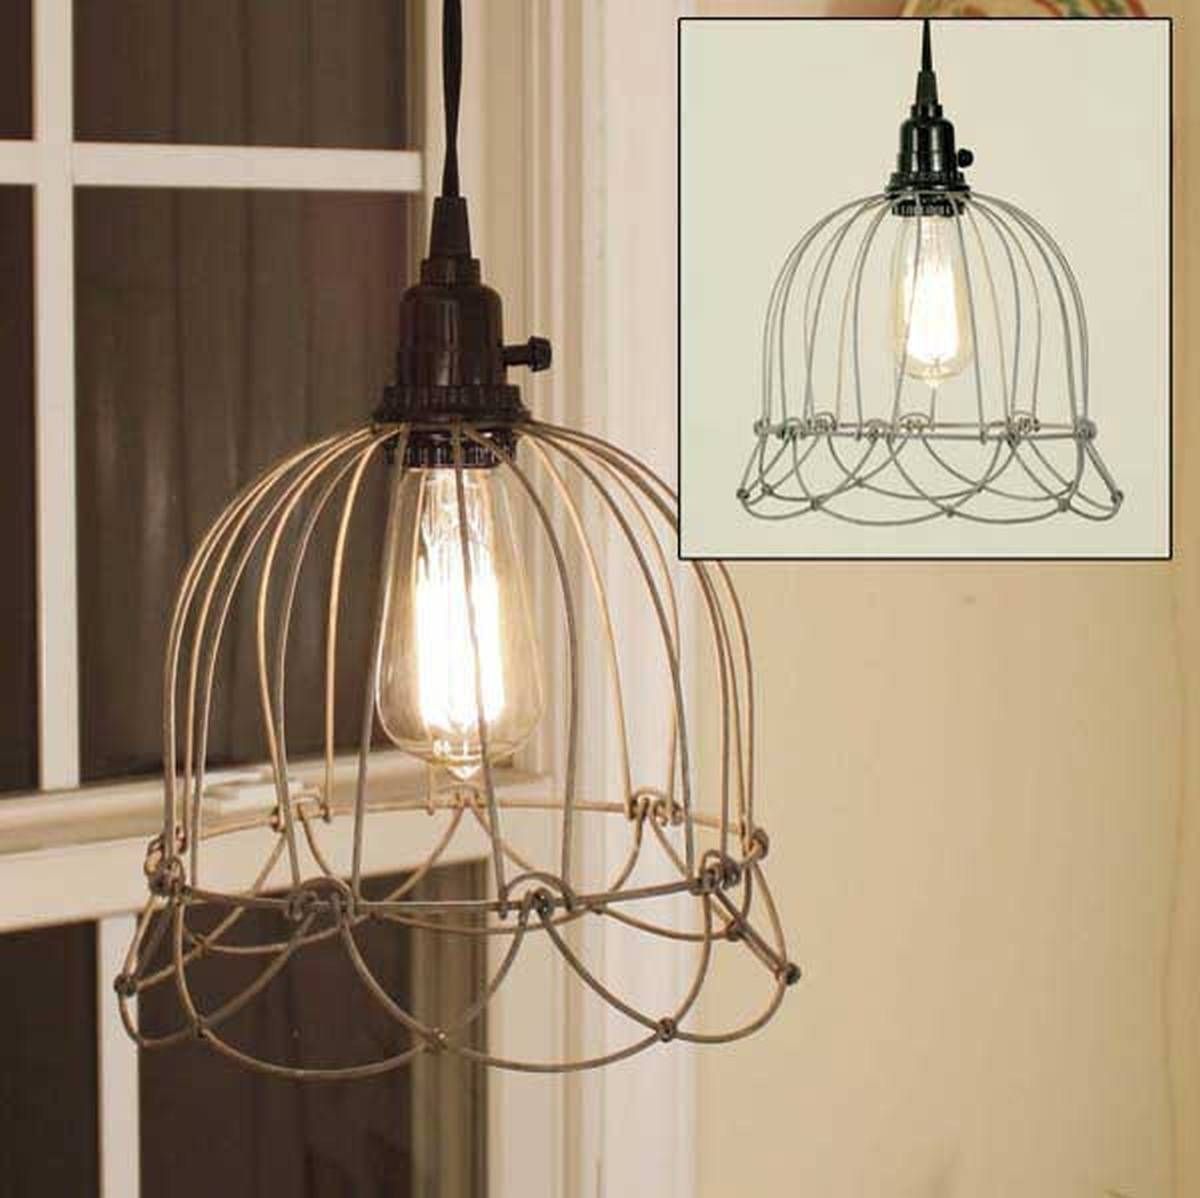 Amazing Wire Pendant Lights 23 For Your Battery Operated Pendant Inside Primitive Pendant Lighting (View 5 of 15)